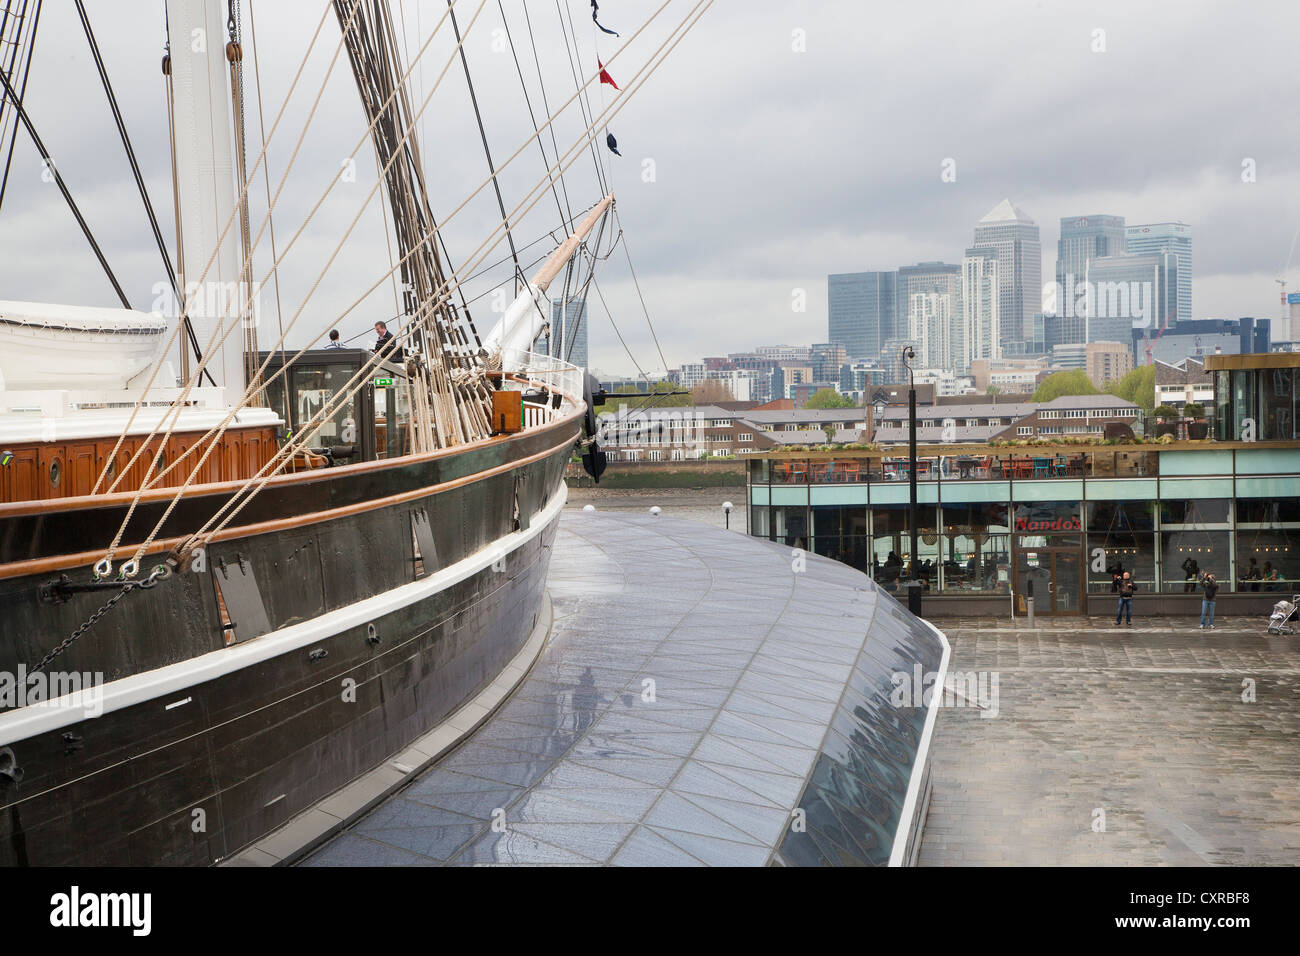 The Cutty Sark an historic tea clipper from the 1800's photographed in dry dock at Greenwich with city view Stock Photo